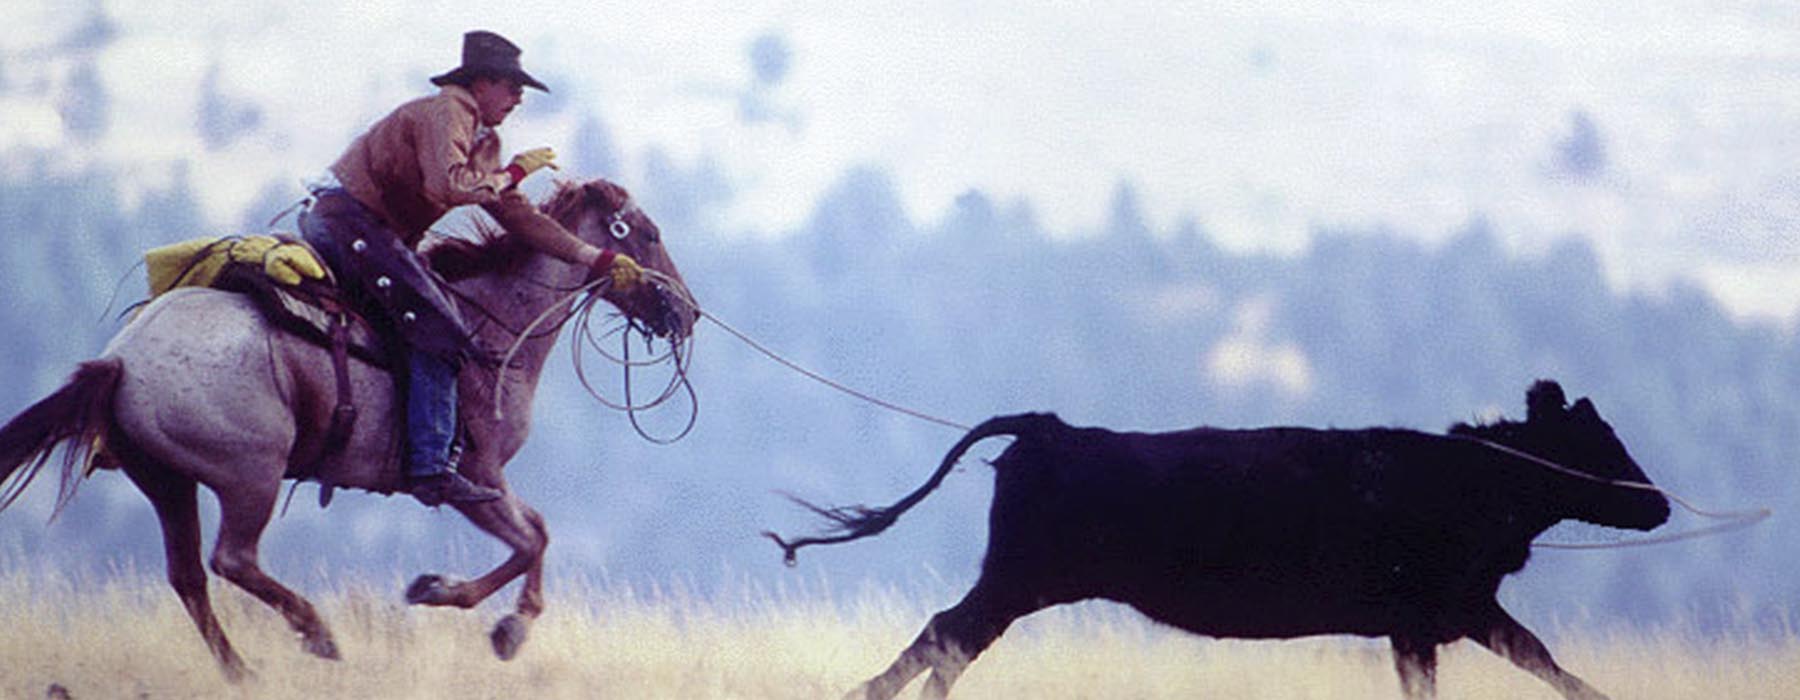 Rancher roping a cow.